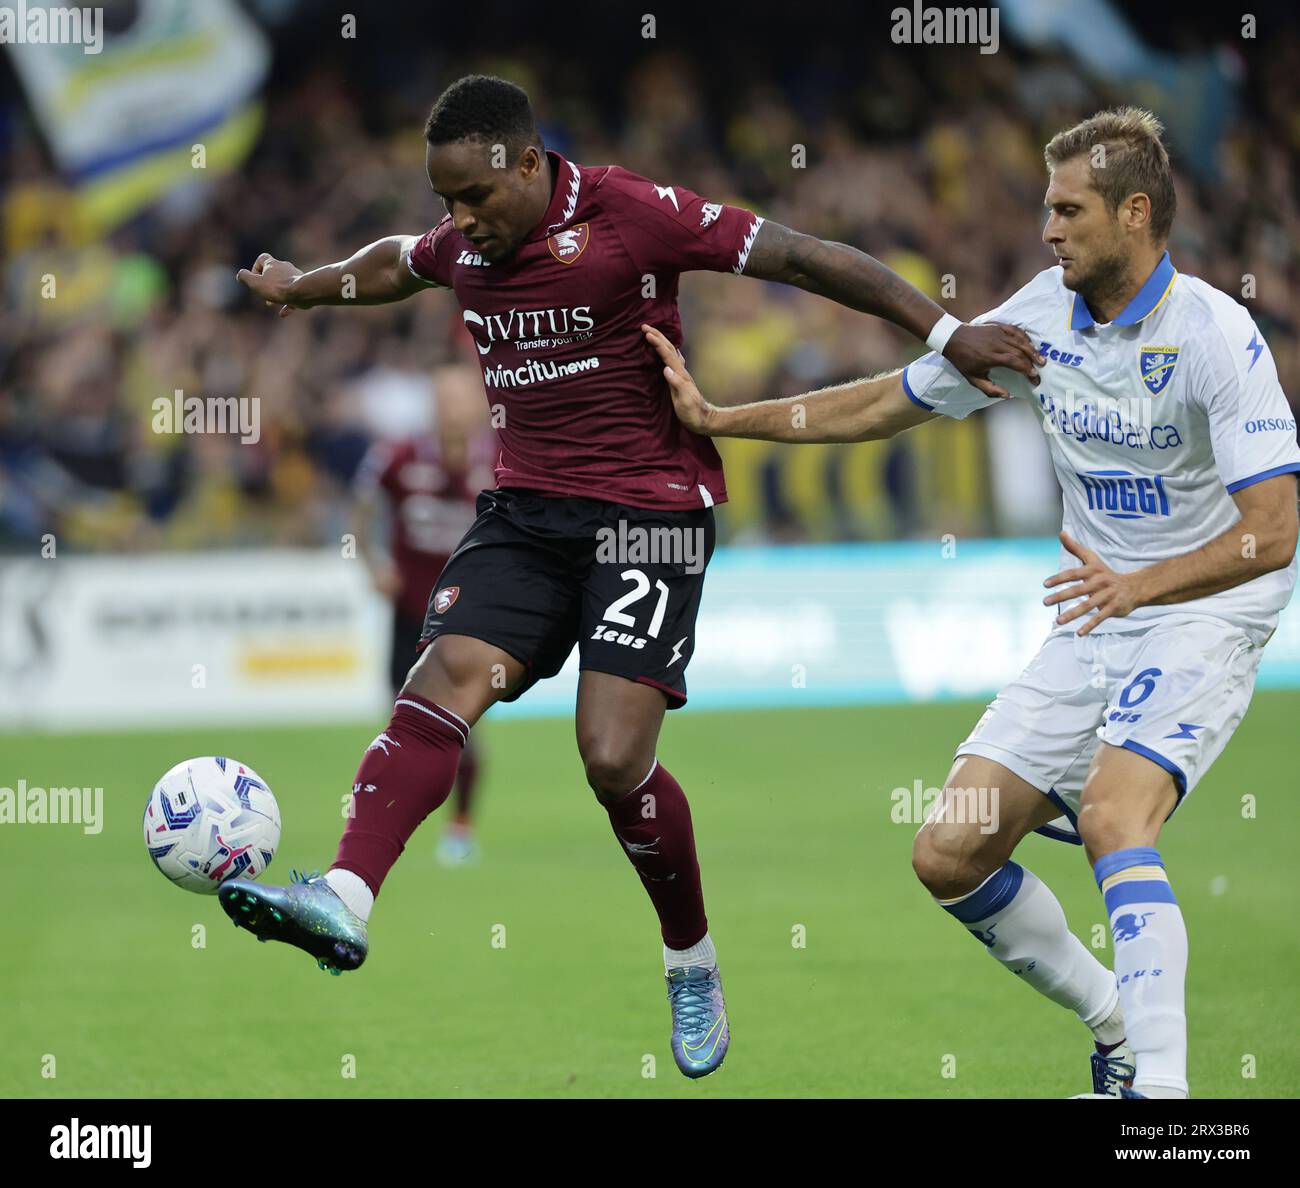 Salerno, Italy. 25th Aug, 2023. Jovane Cabral of US Salernitana and Simone Romagnoli of Frosinone compete for the ball during the Serie A football match between US Salernitana and Frosinone Calcio at Arechi stadium in Salerno (Italy), September 22nd, 2023. Credit: Insidefoto di andrea staccioli/Alamy Live News Stock Photo